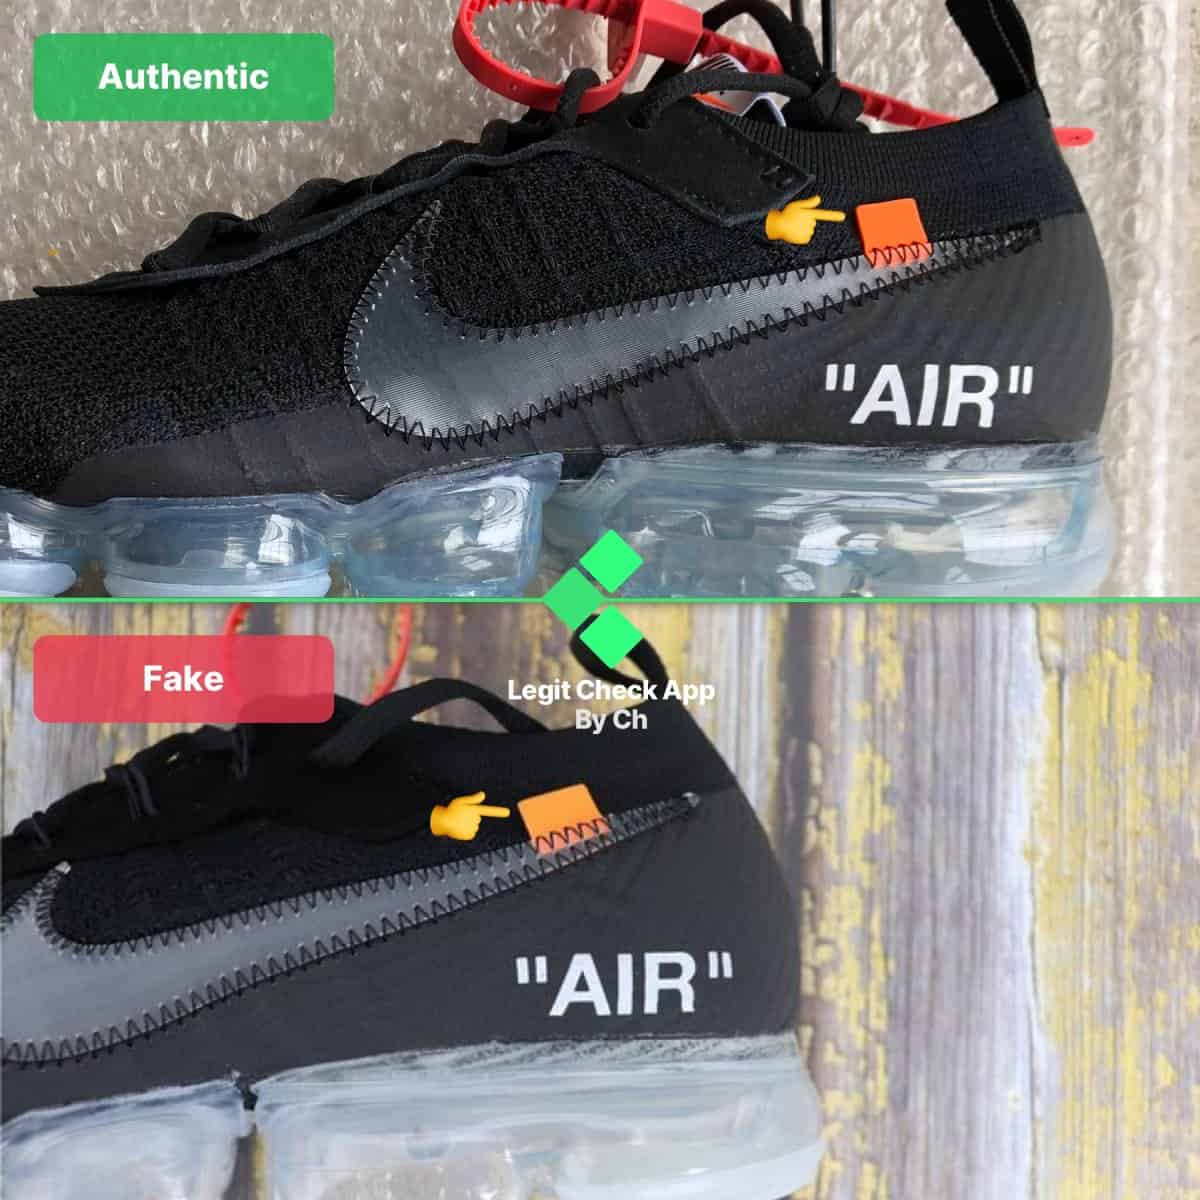 Real Vs Fake Off-White Vapormax Black Nike Guide - Legit Check By Ch